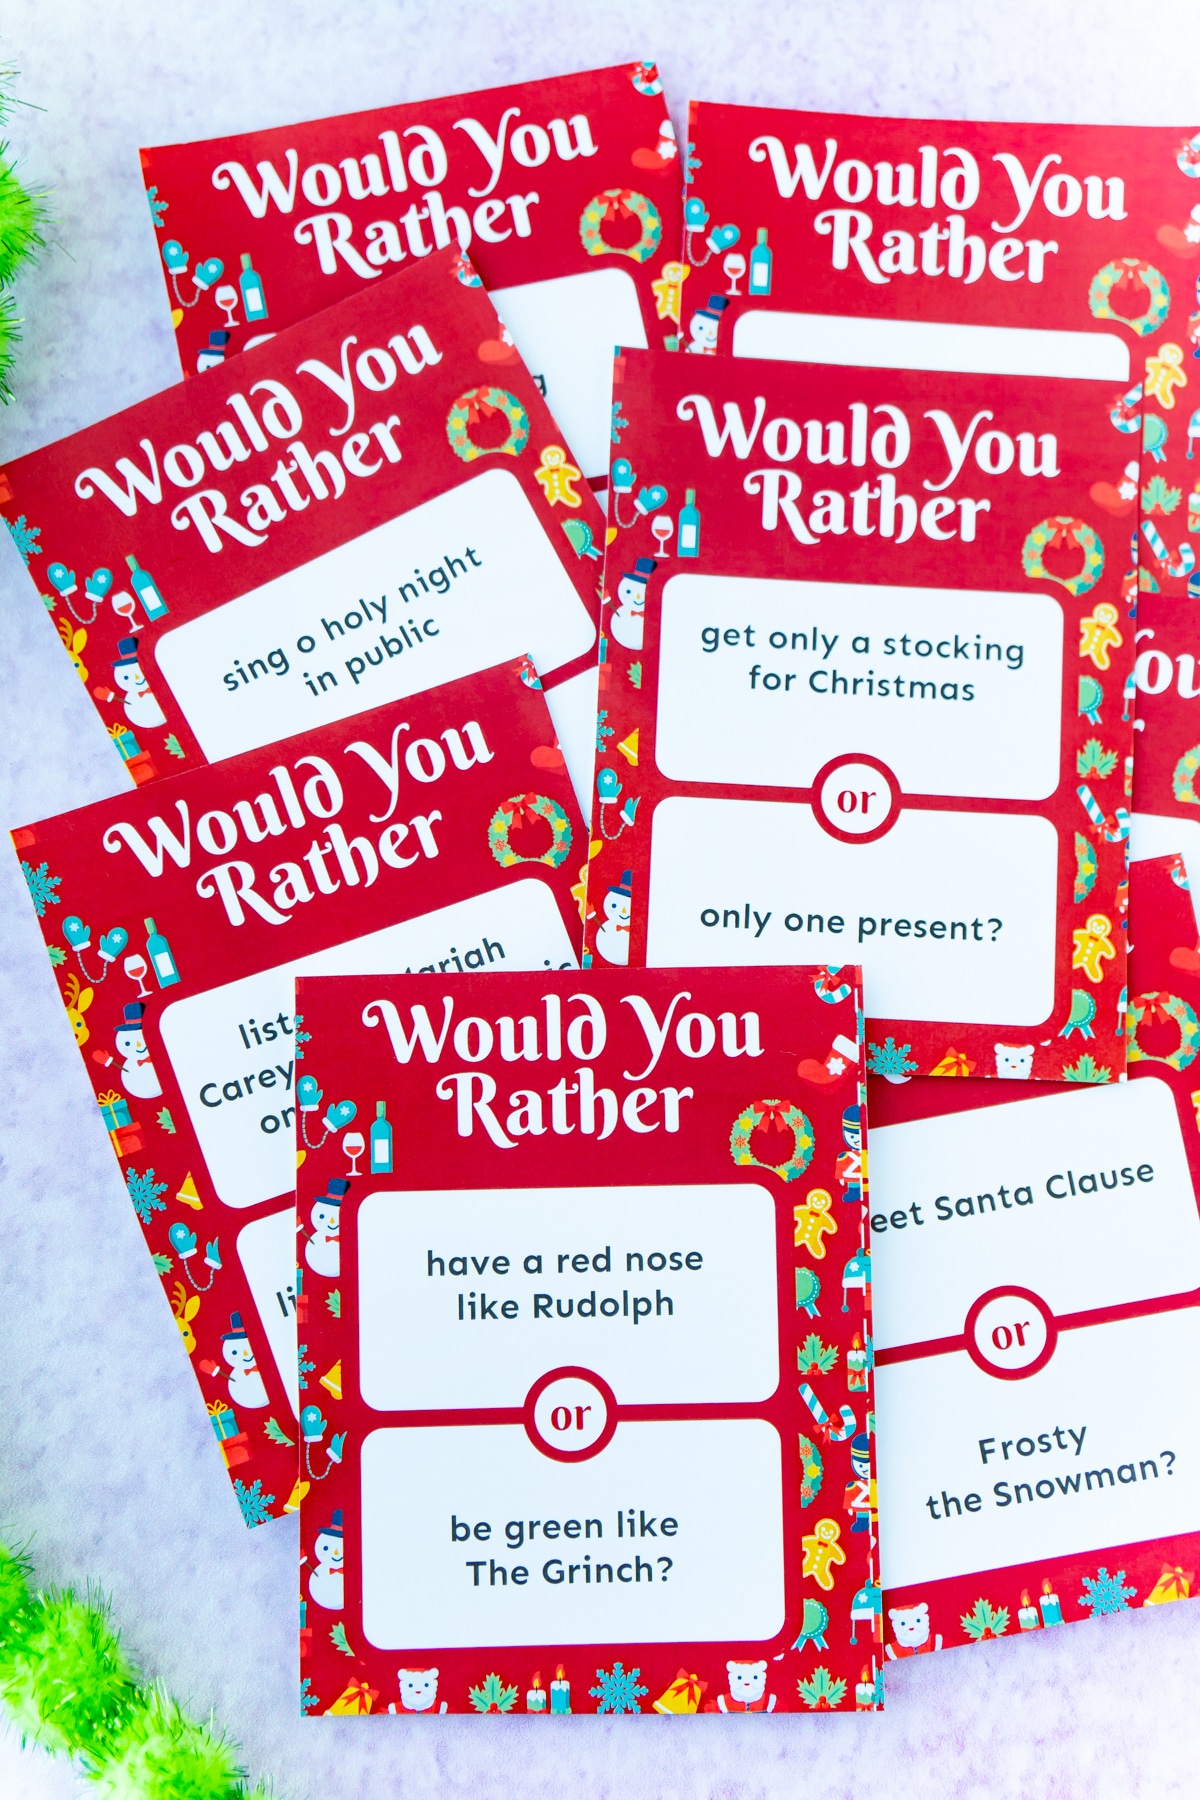 25 Hilarious Christmas Party Games You Have to Try - 73